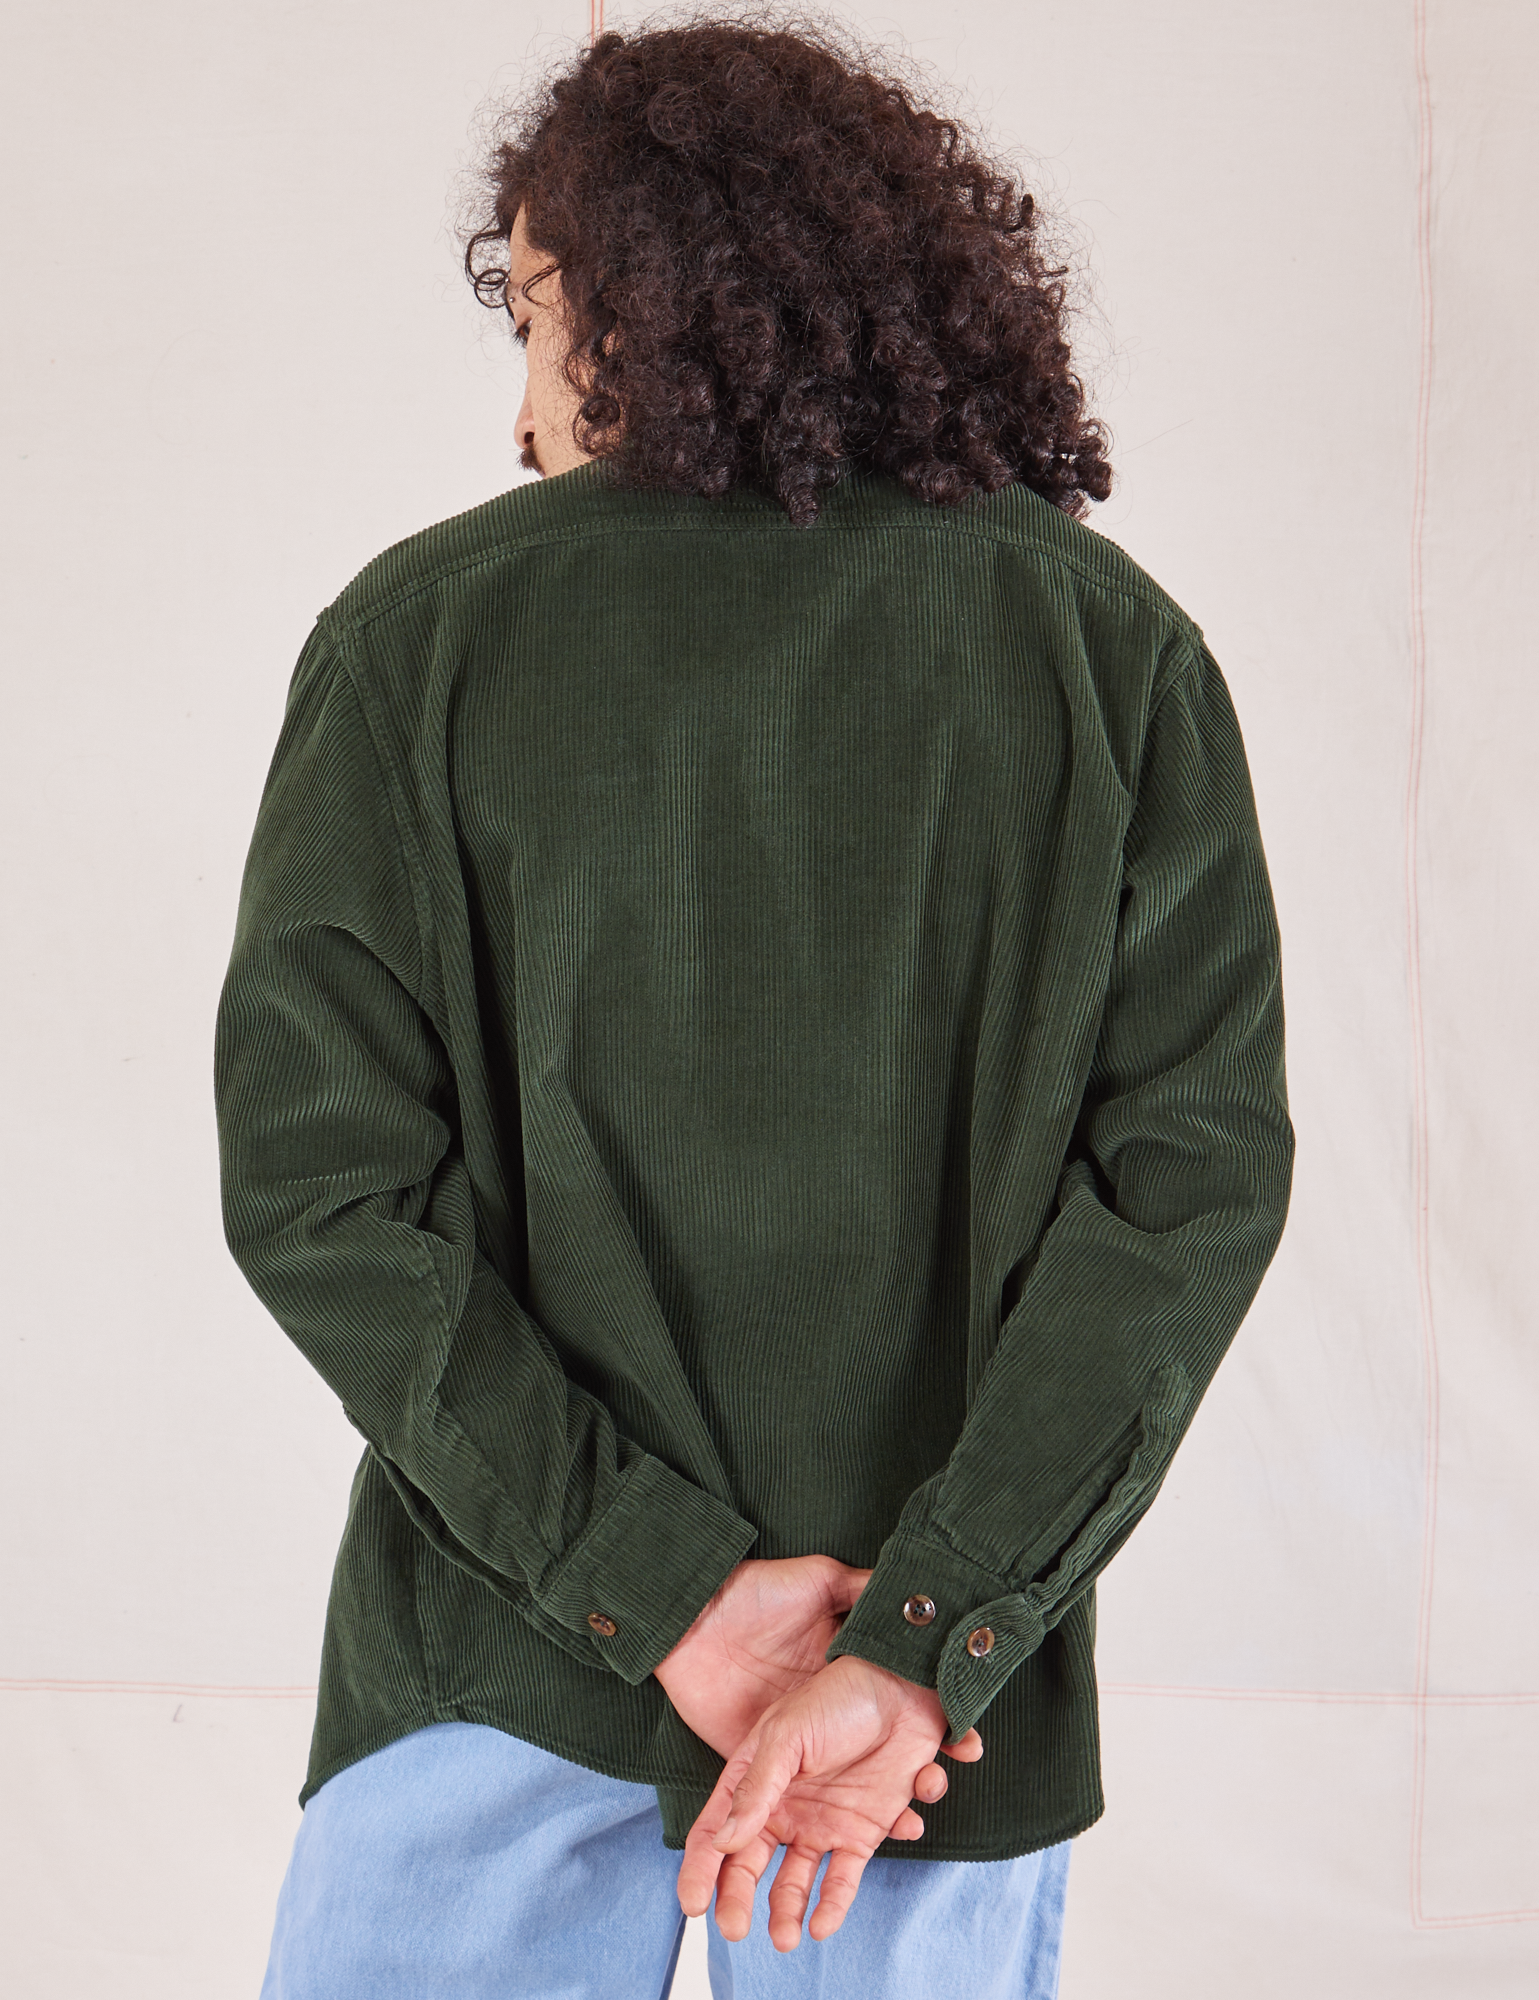 Corduroy Overshirt in Swamp Green back view on Jesse